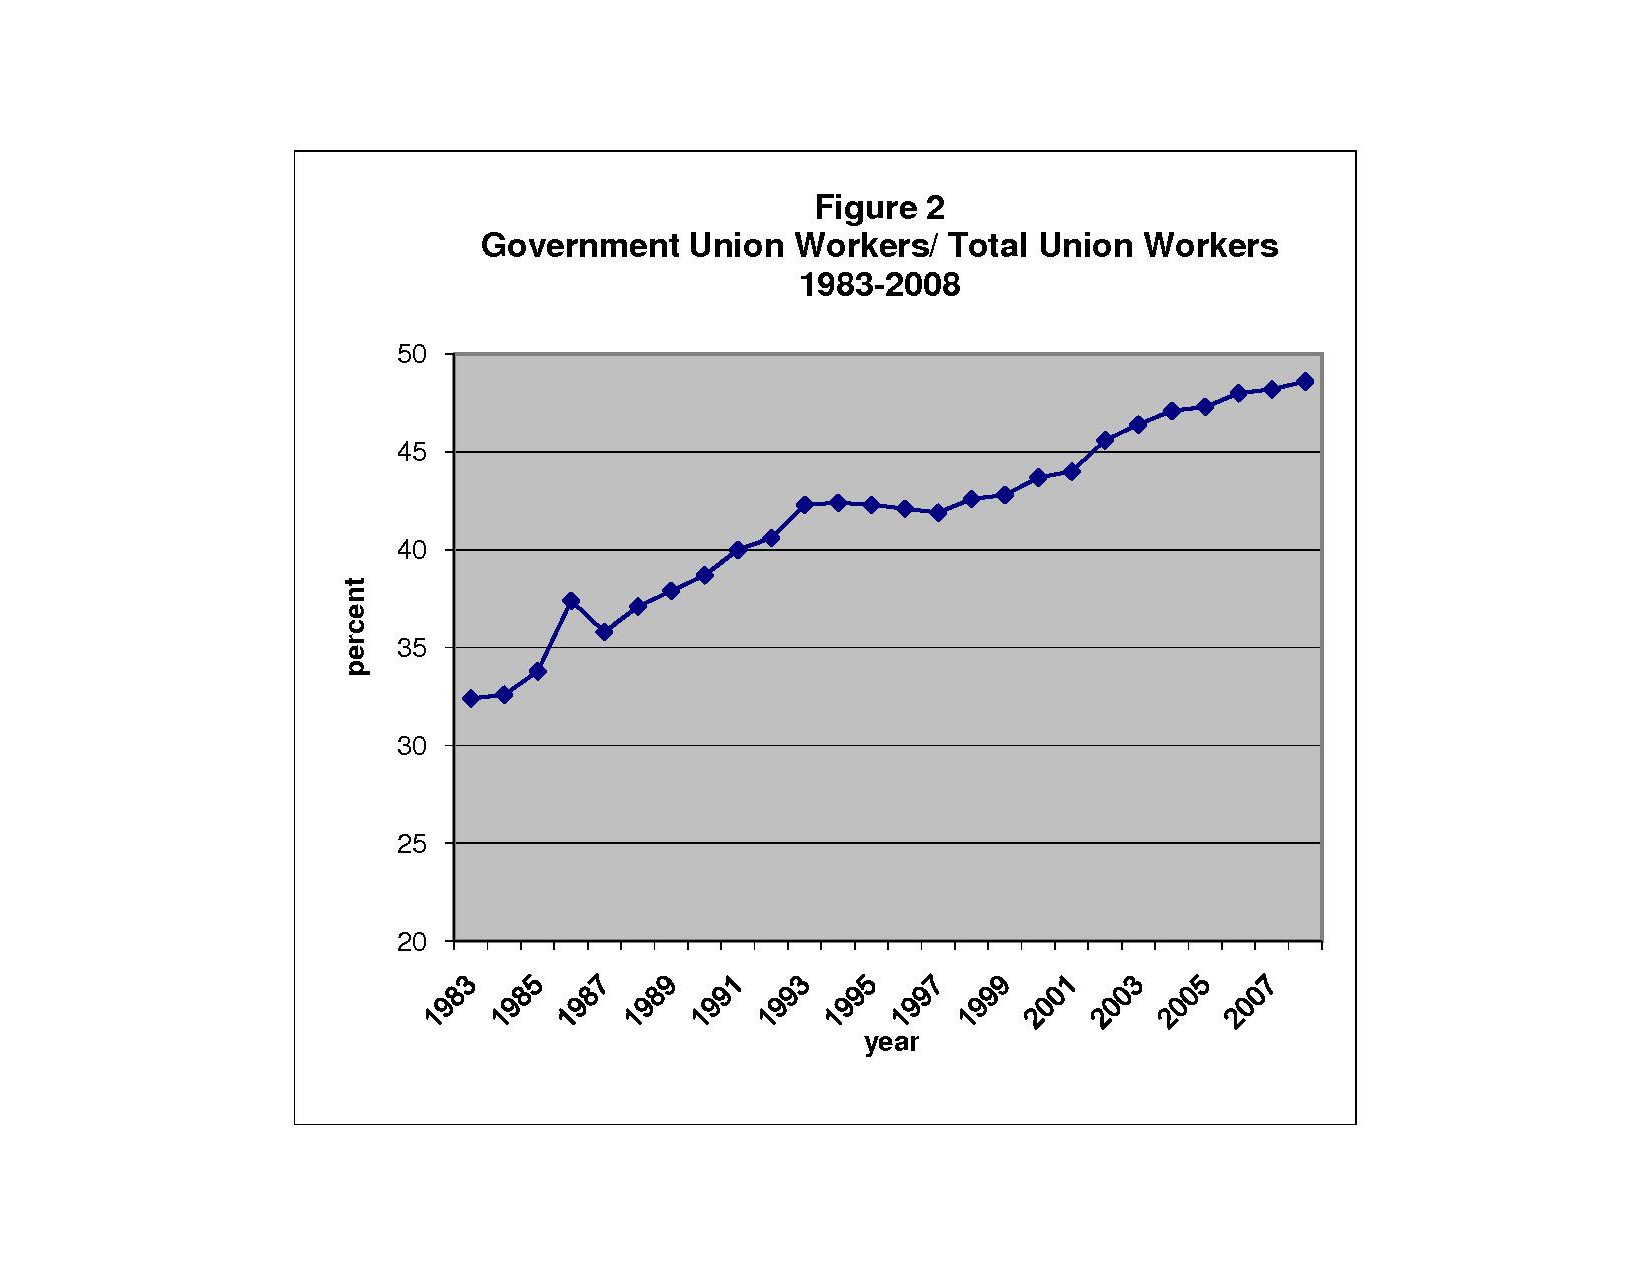 Figure 2. Government Union Works / Total Workers, 1983-2008